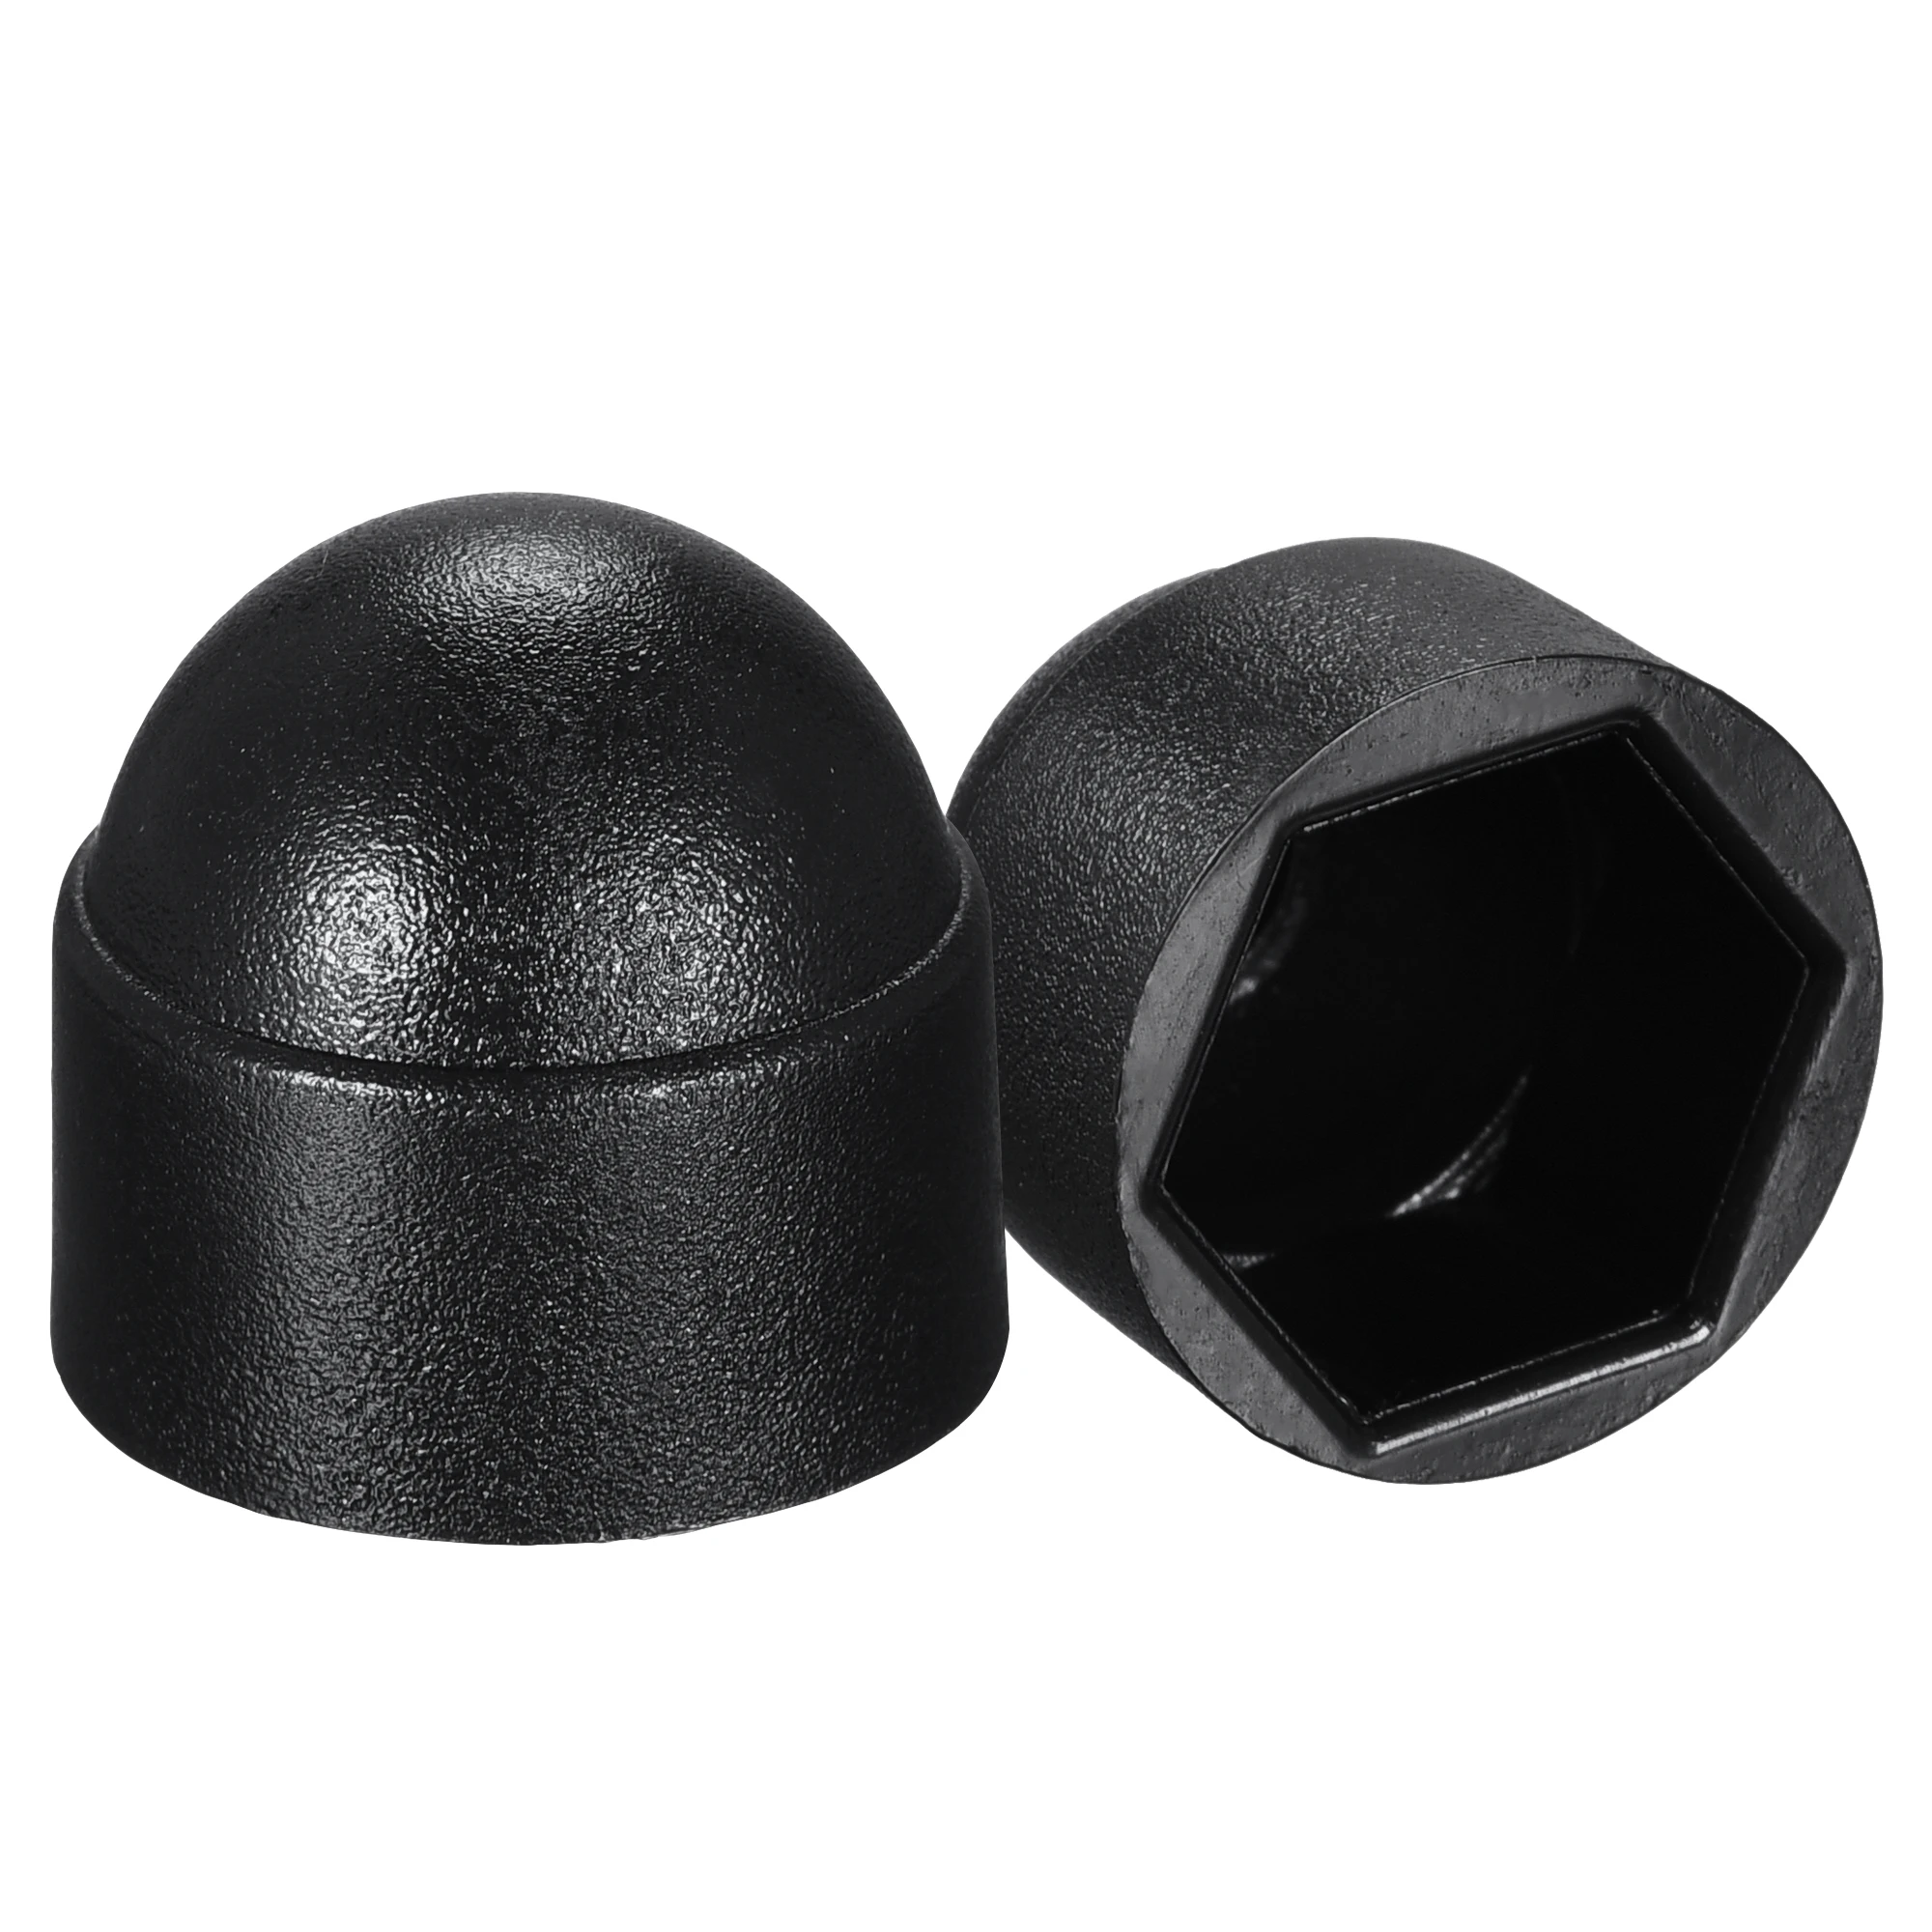 

Uxcell 100Pcs Plastic Dome Bolt Nut Protection Cap M8 / 13mm Hex Screw Cover Black for Protecting Bolts and Nuts